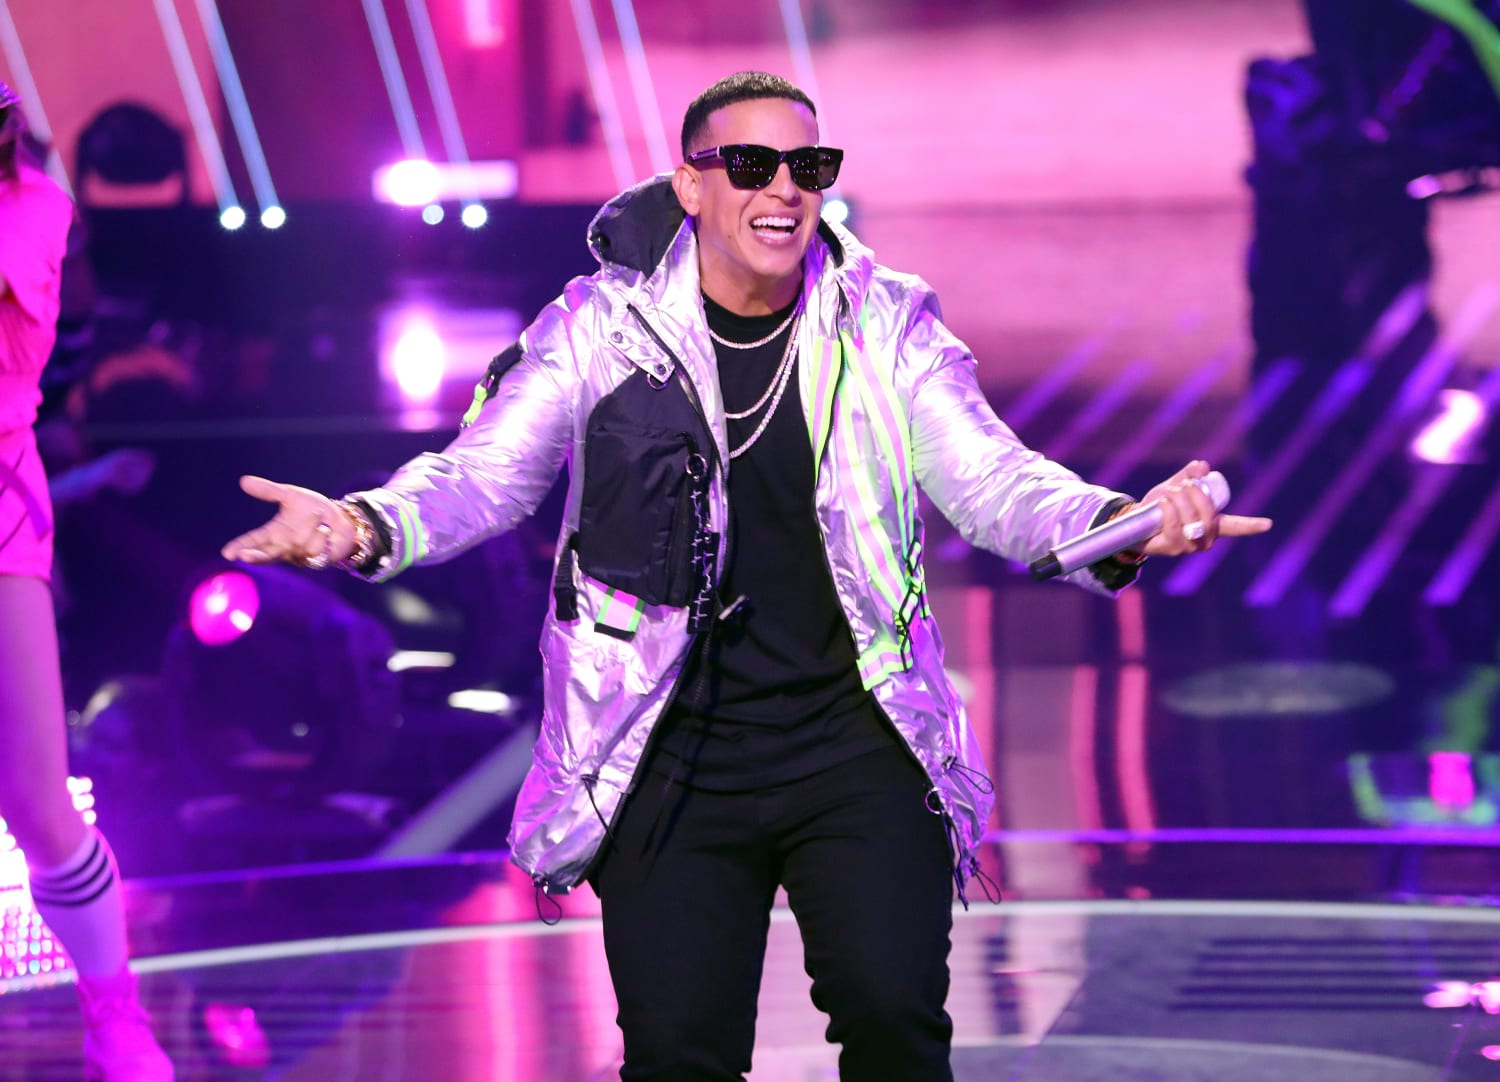 Daddy Yankee Announces He's Retiring in Emotional Video